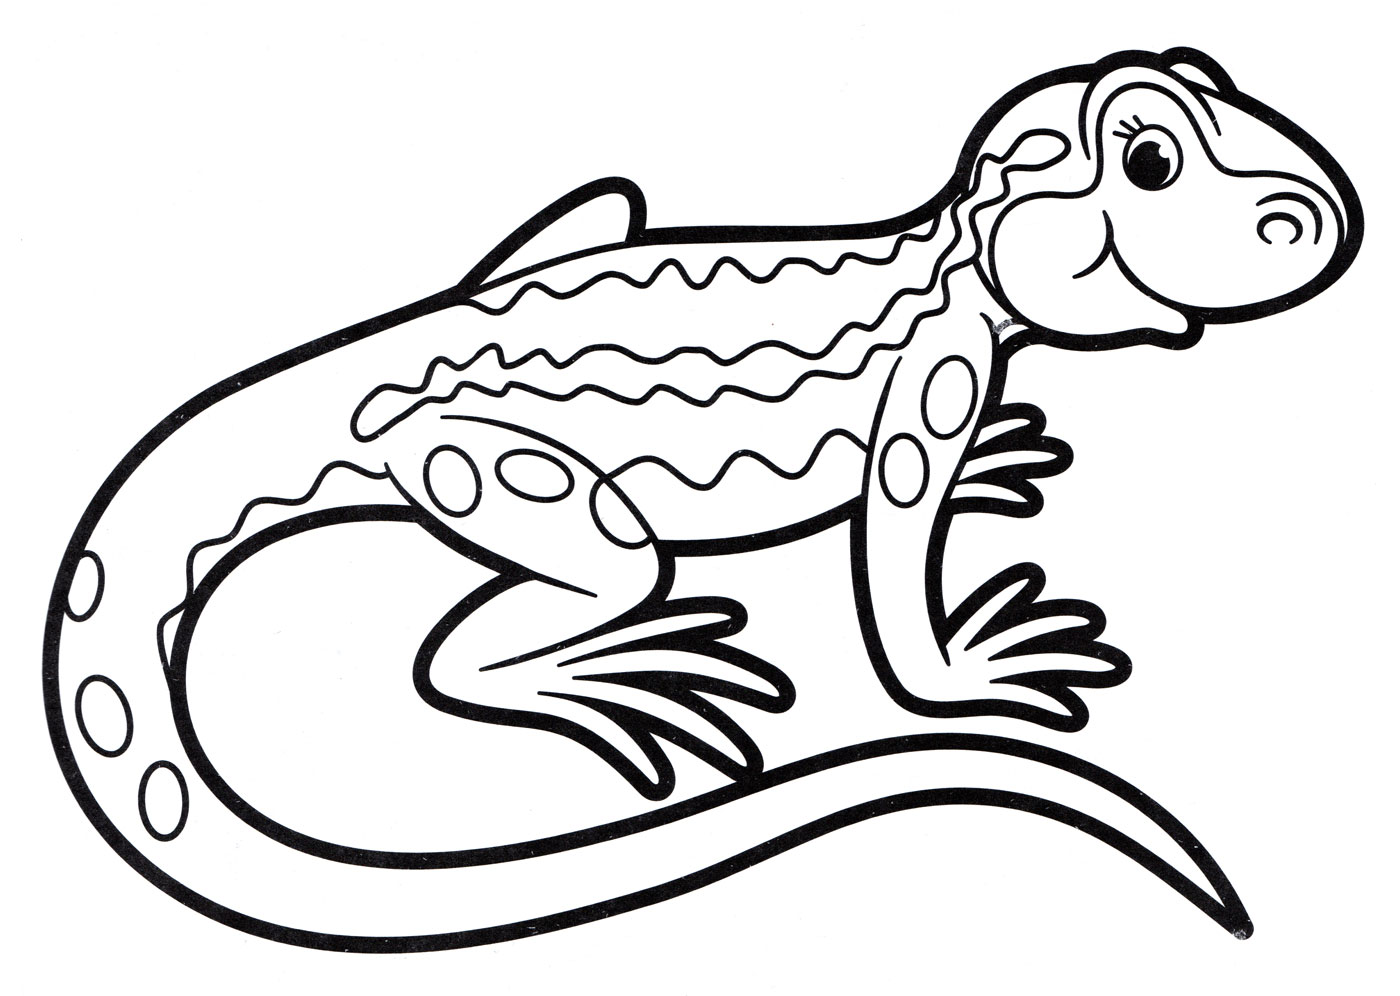 lizard-coloring-pages-to-download-and-print-for-free